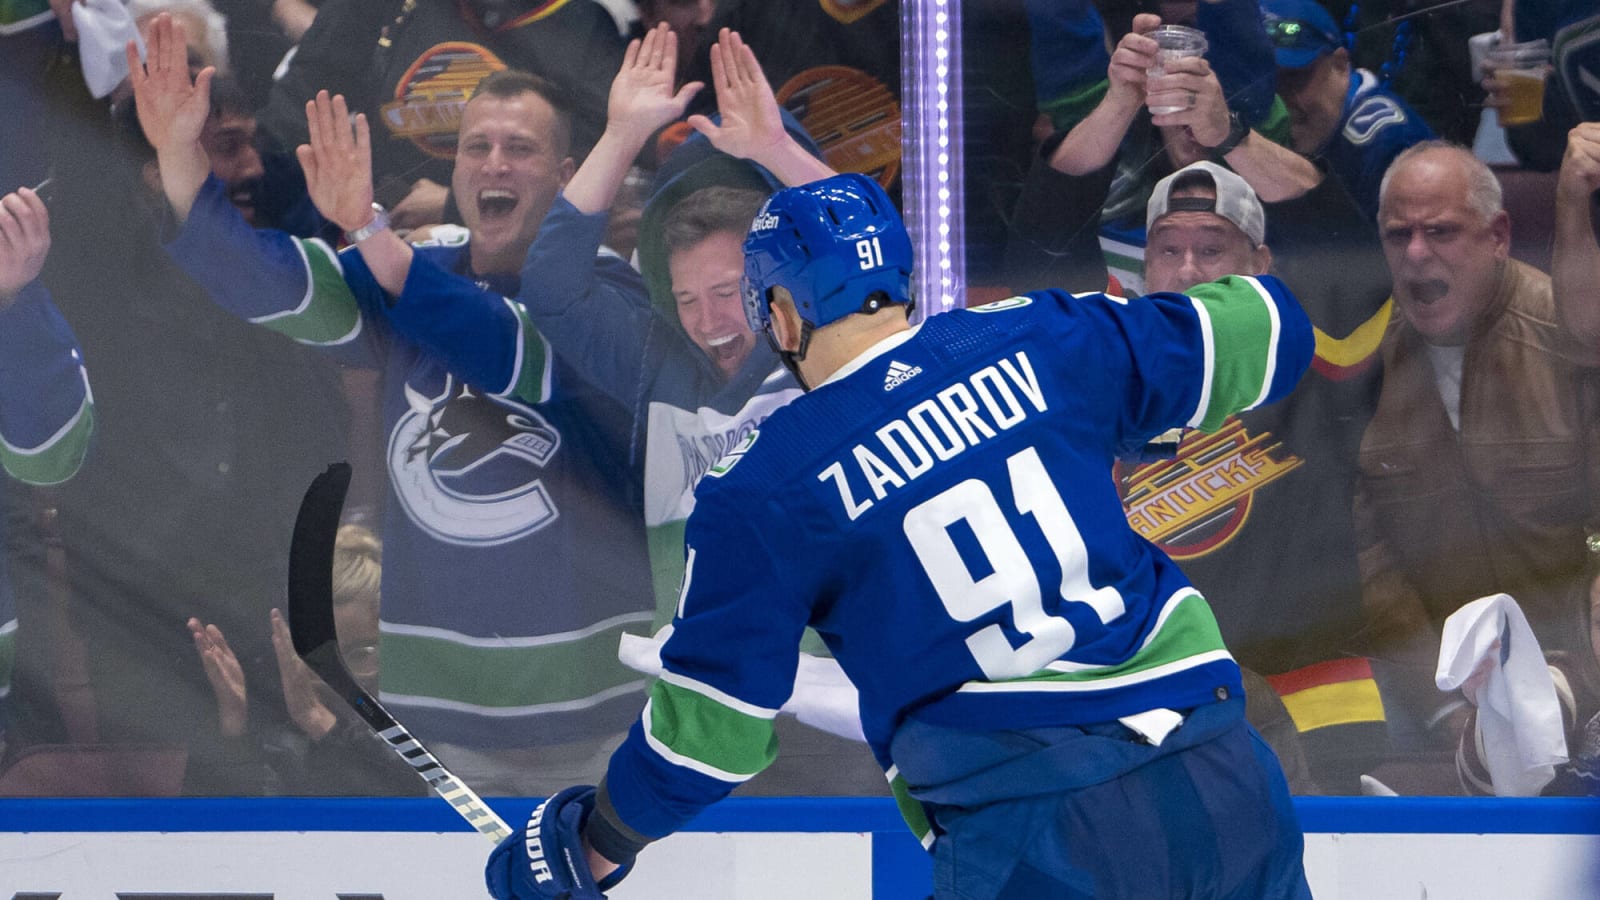 ‘Nothing else to do in that city’: Canucks’ Zadorov compliments Oilers fans with a side of shade for Edmonton